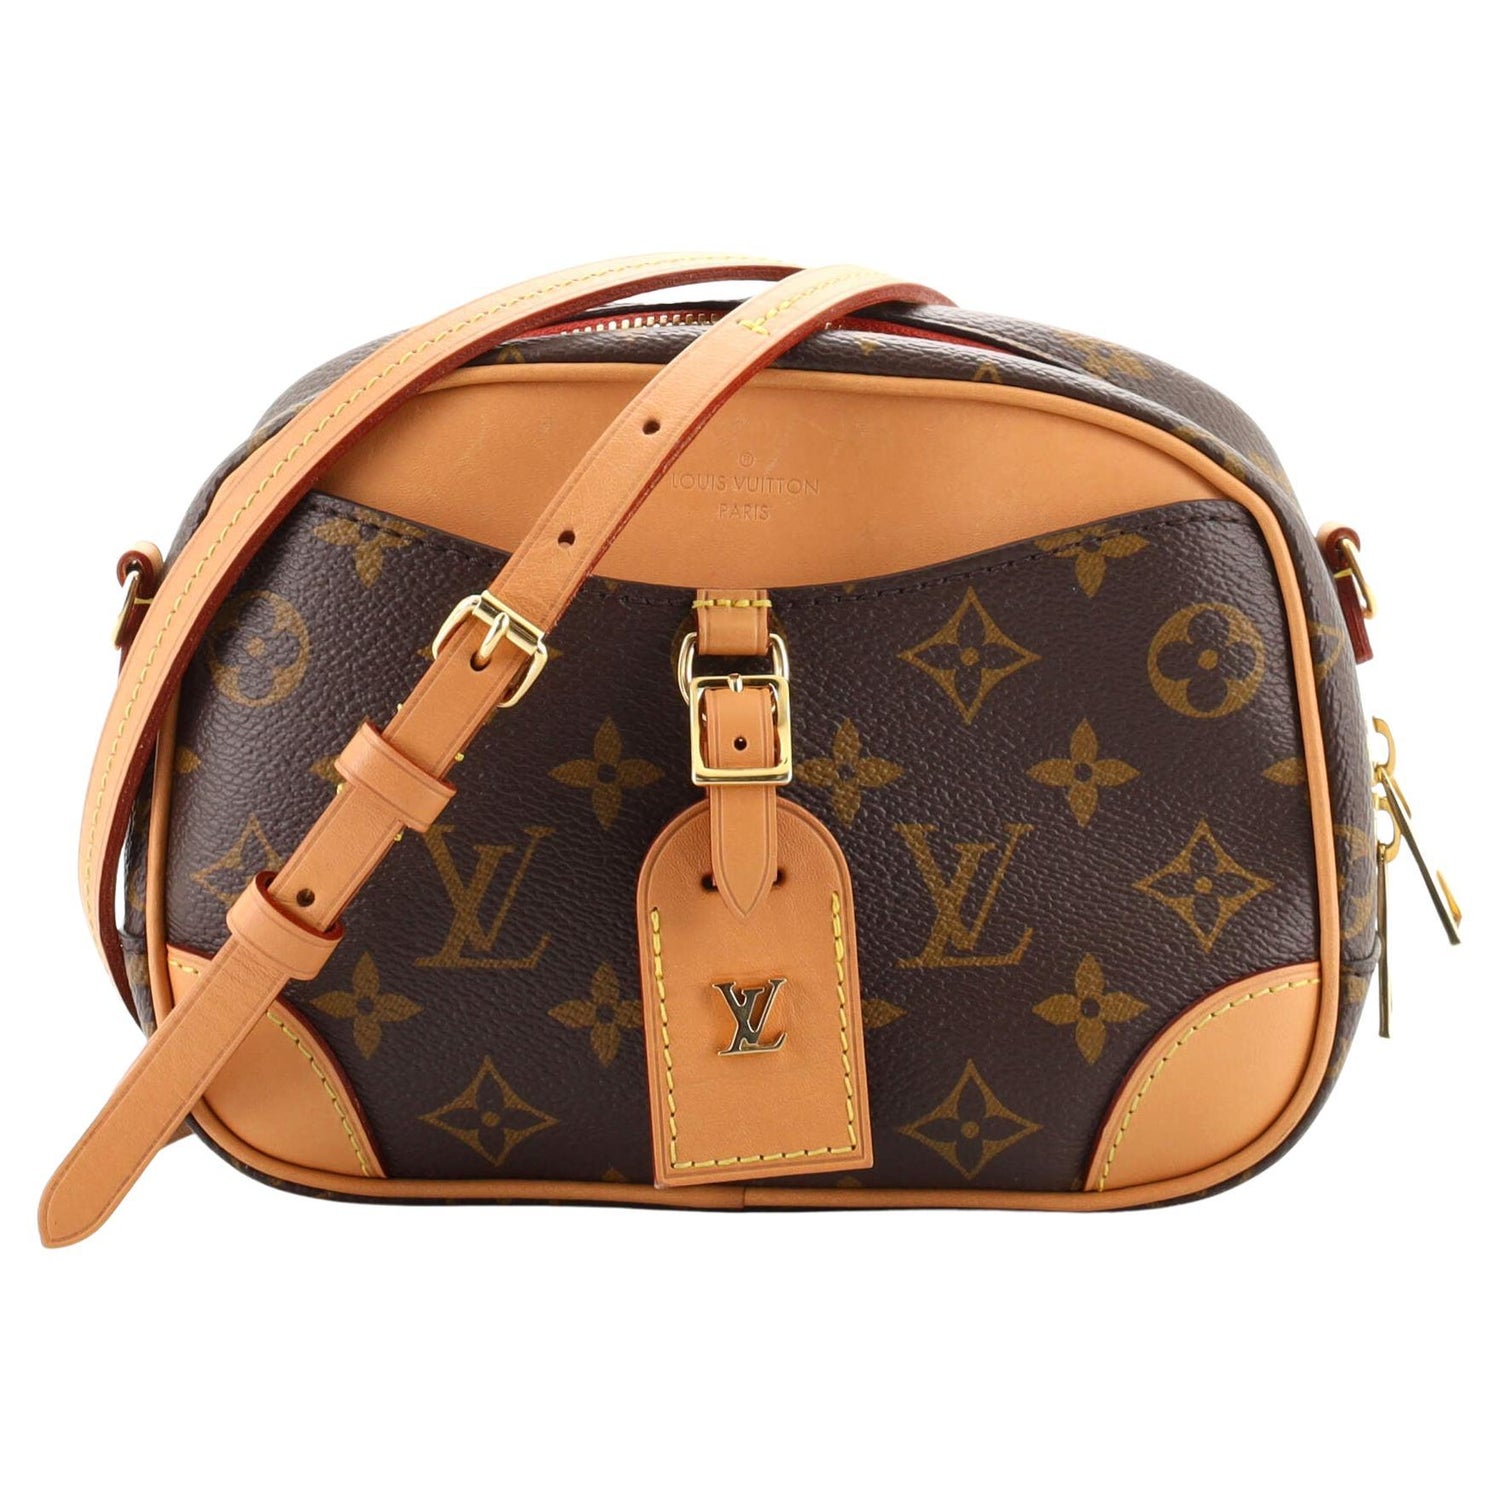 LOUIS VUITTON Monogram Deauville Mini Height: 6 in Width: 3 in Drop: 20 in  Designer ID#: DU2280 Item #: 7226 for Sale in Cary, NC - OfferUp